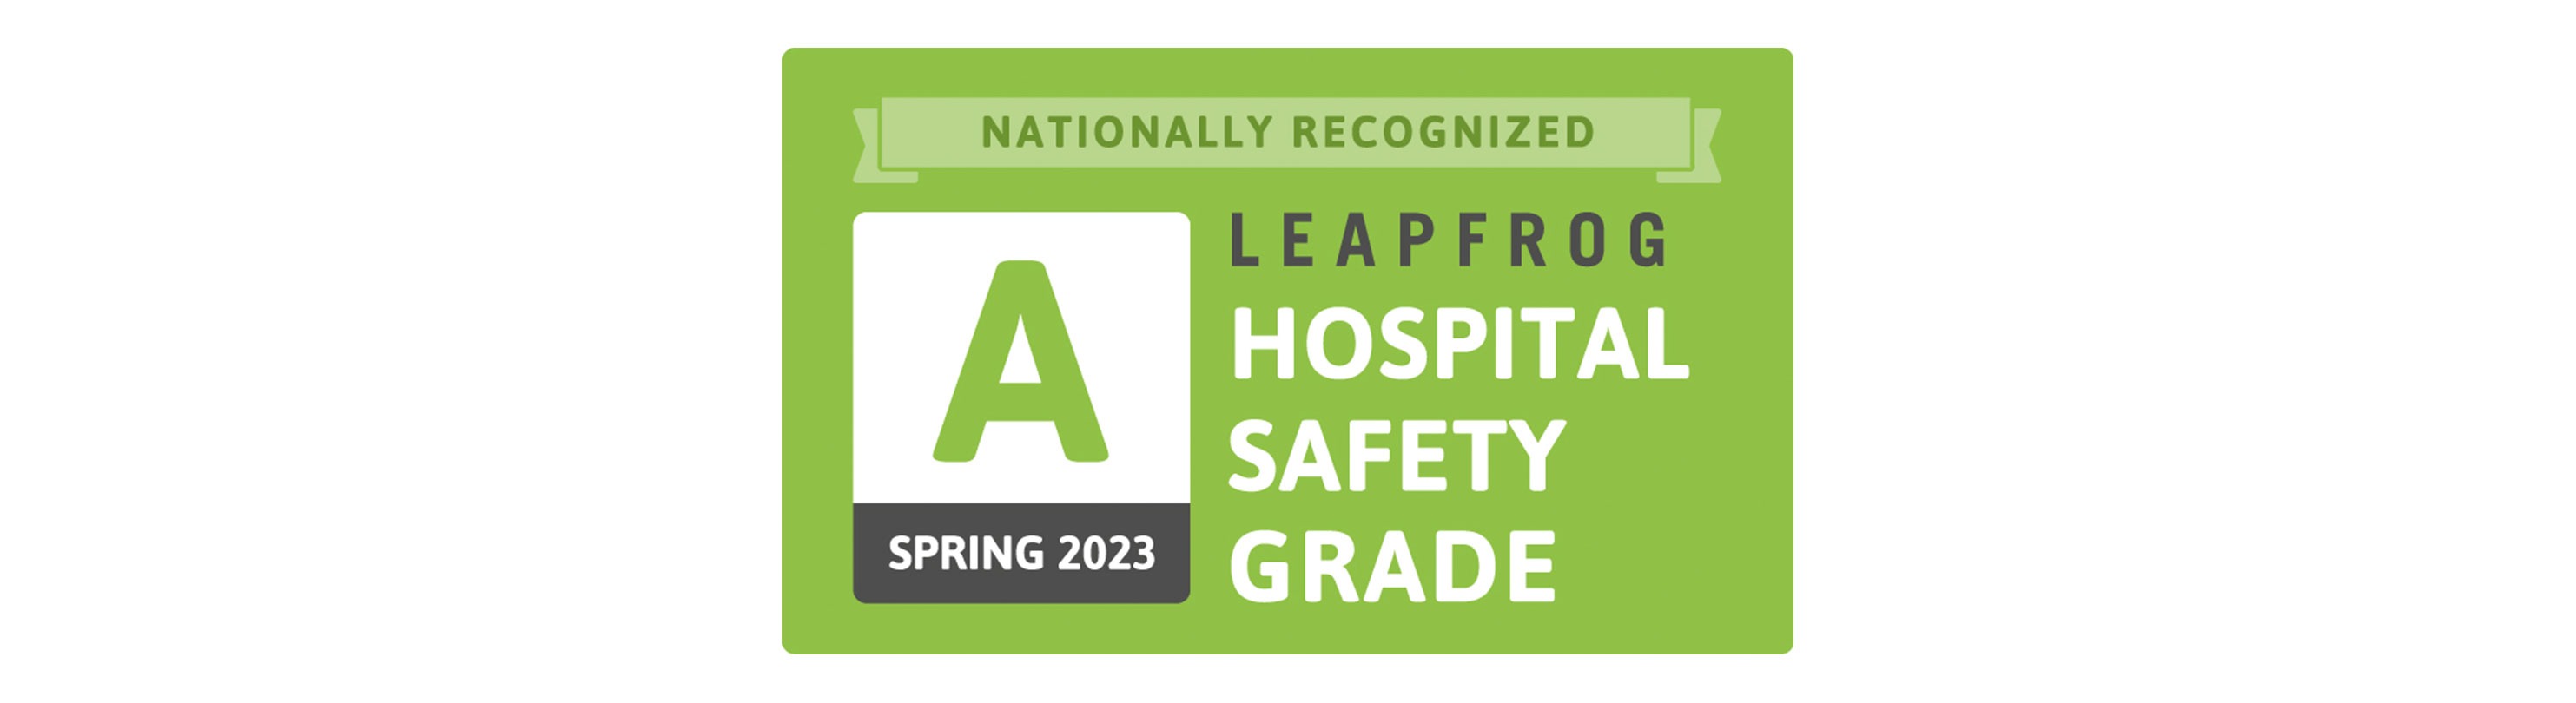 MidState Medical Center Receives “A” Grade for Hospital Safety from Leapfrog Group